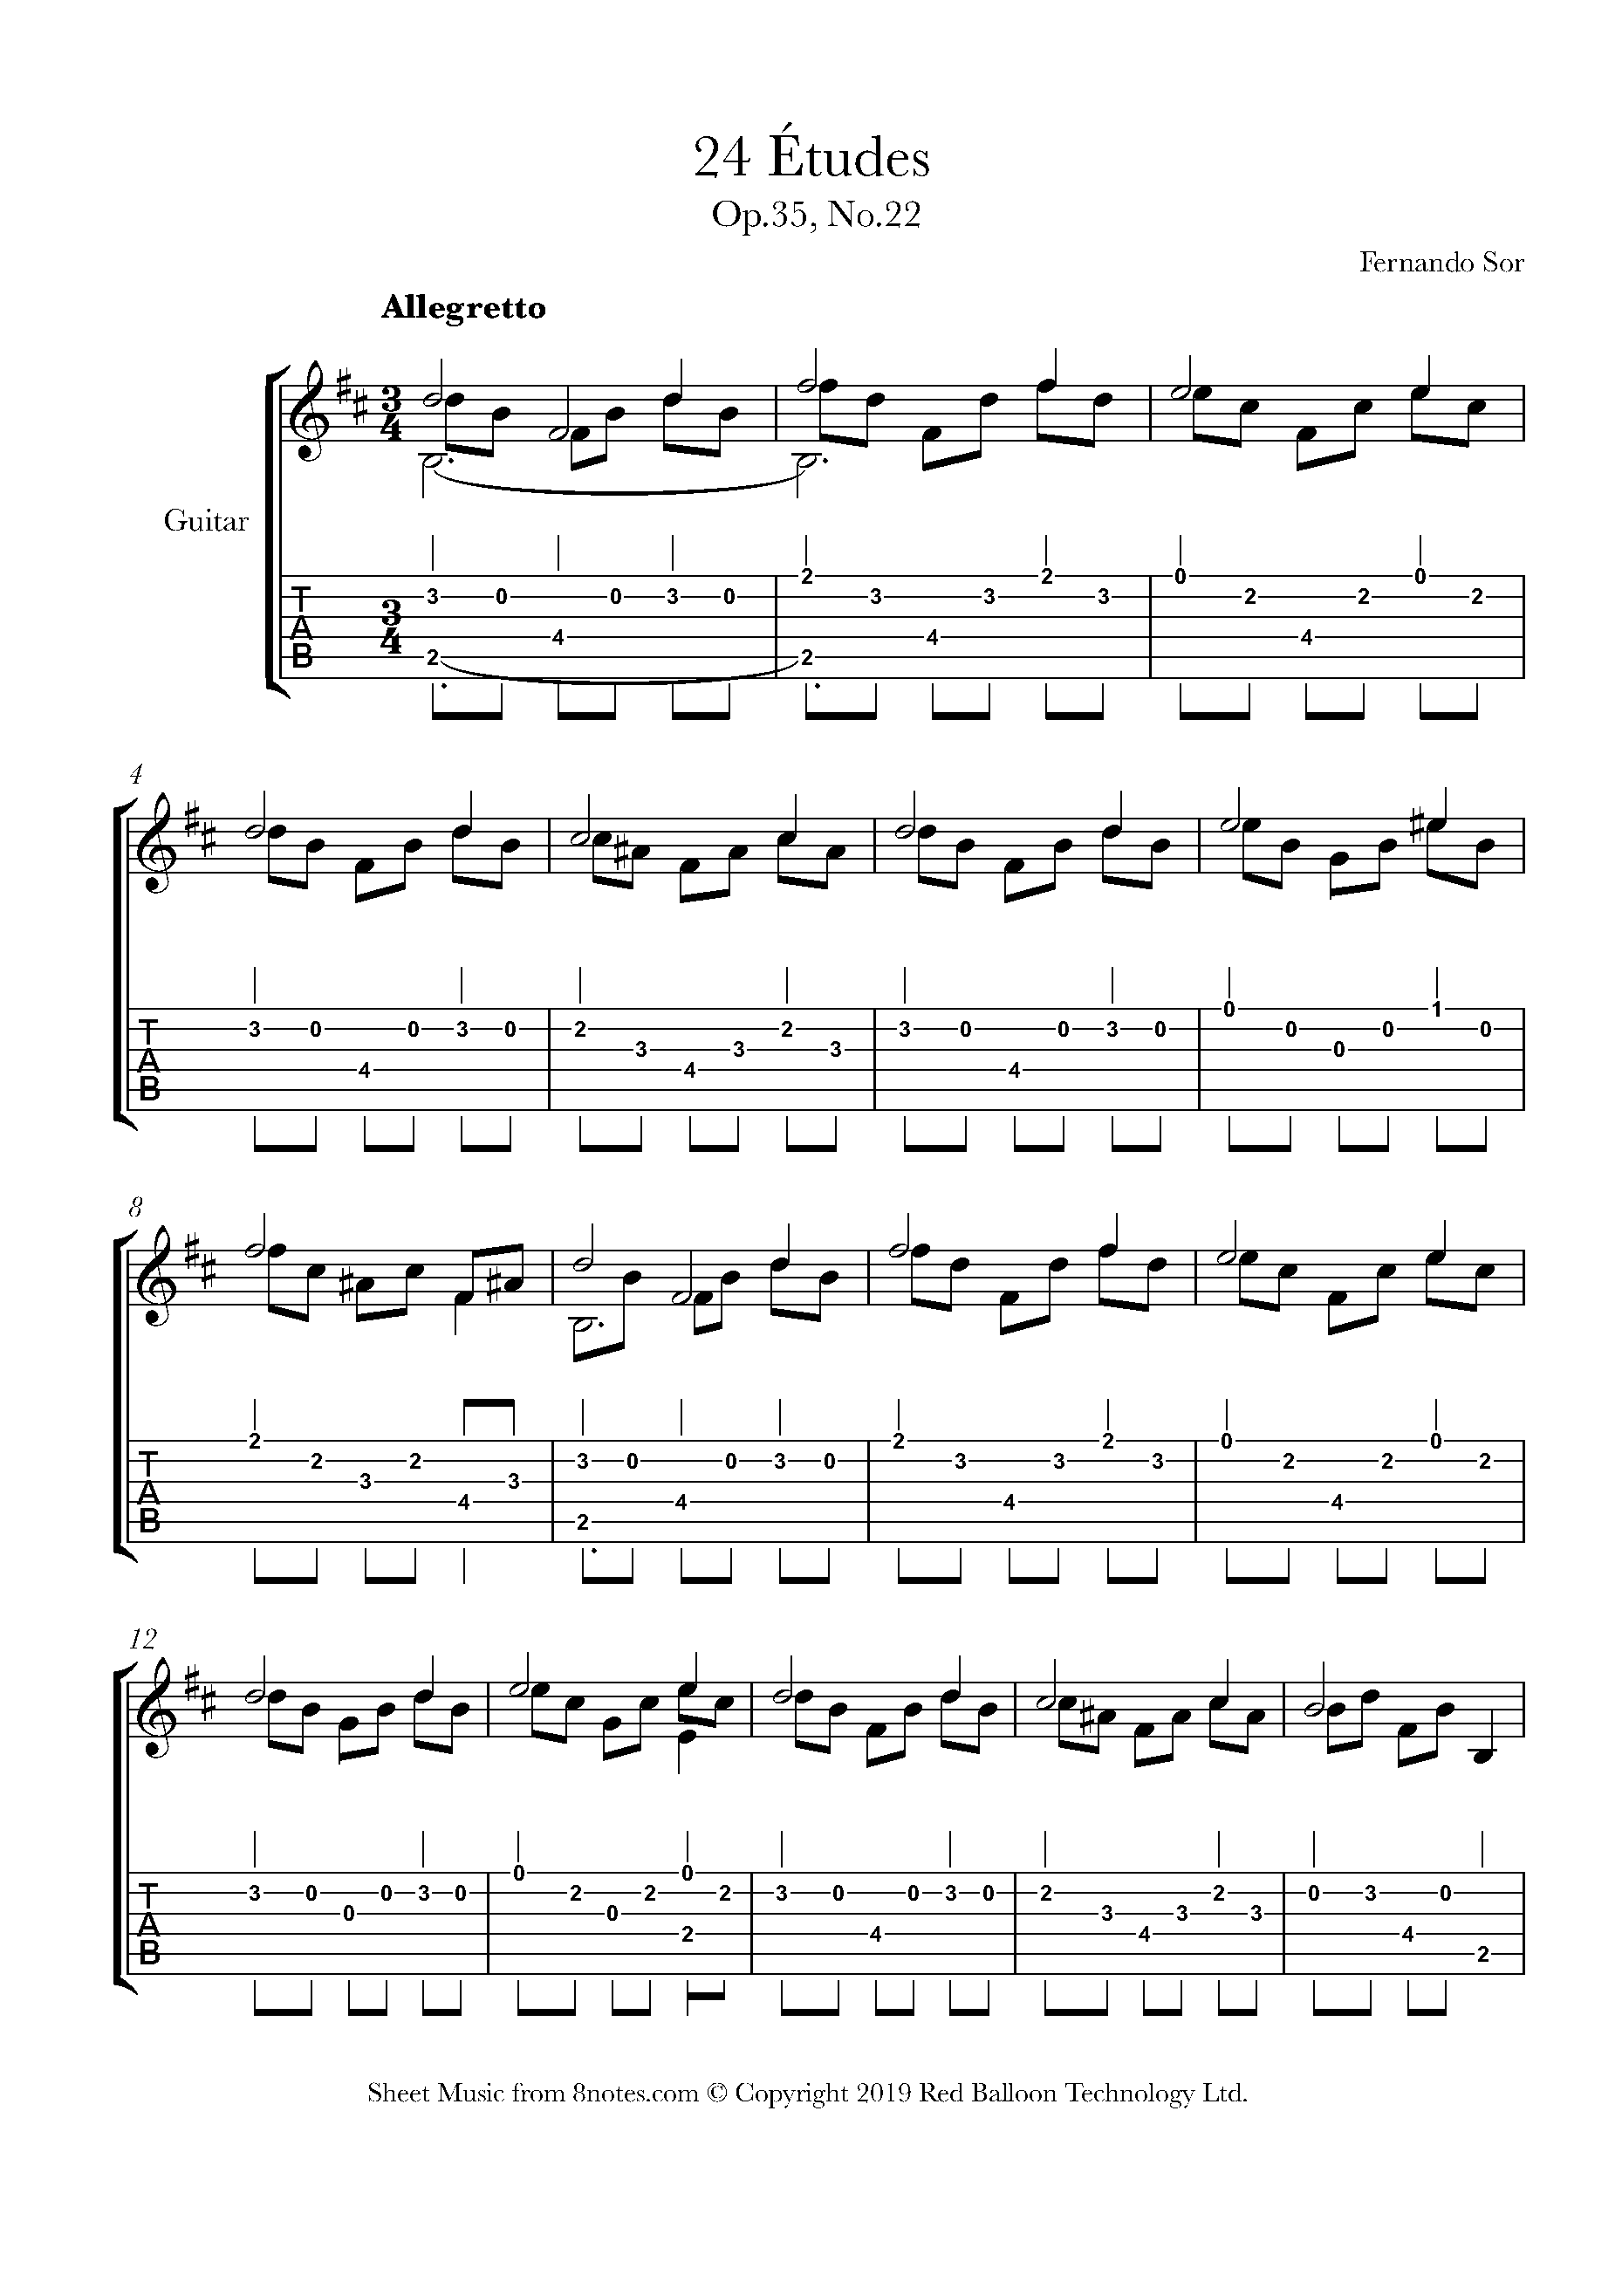 free-guitar-sheet-music-lessons-resources-8notes